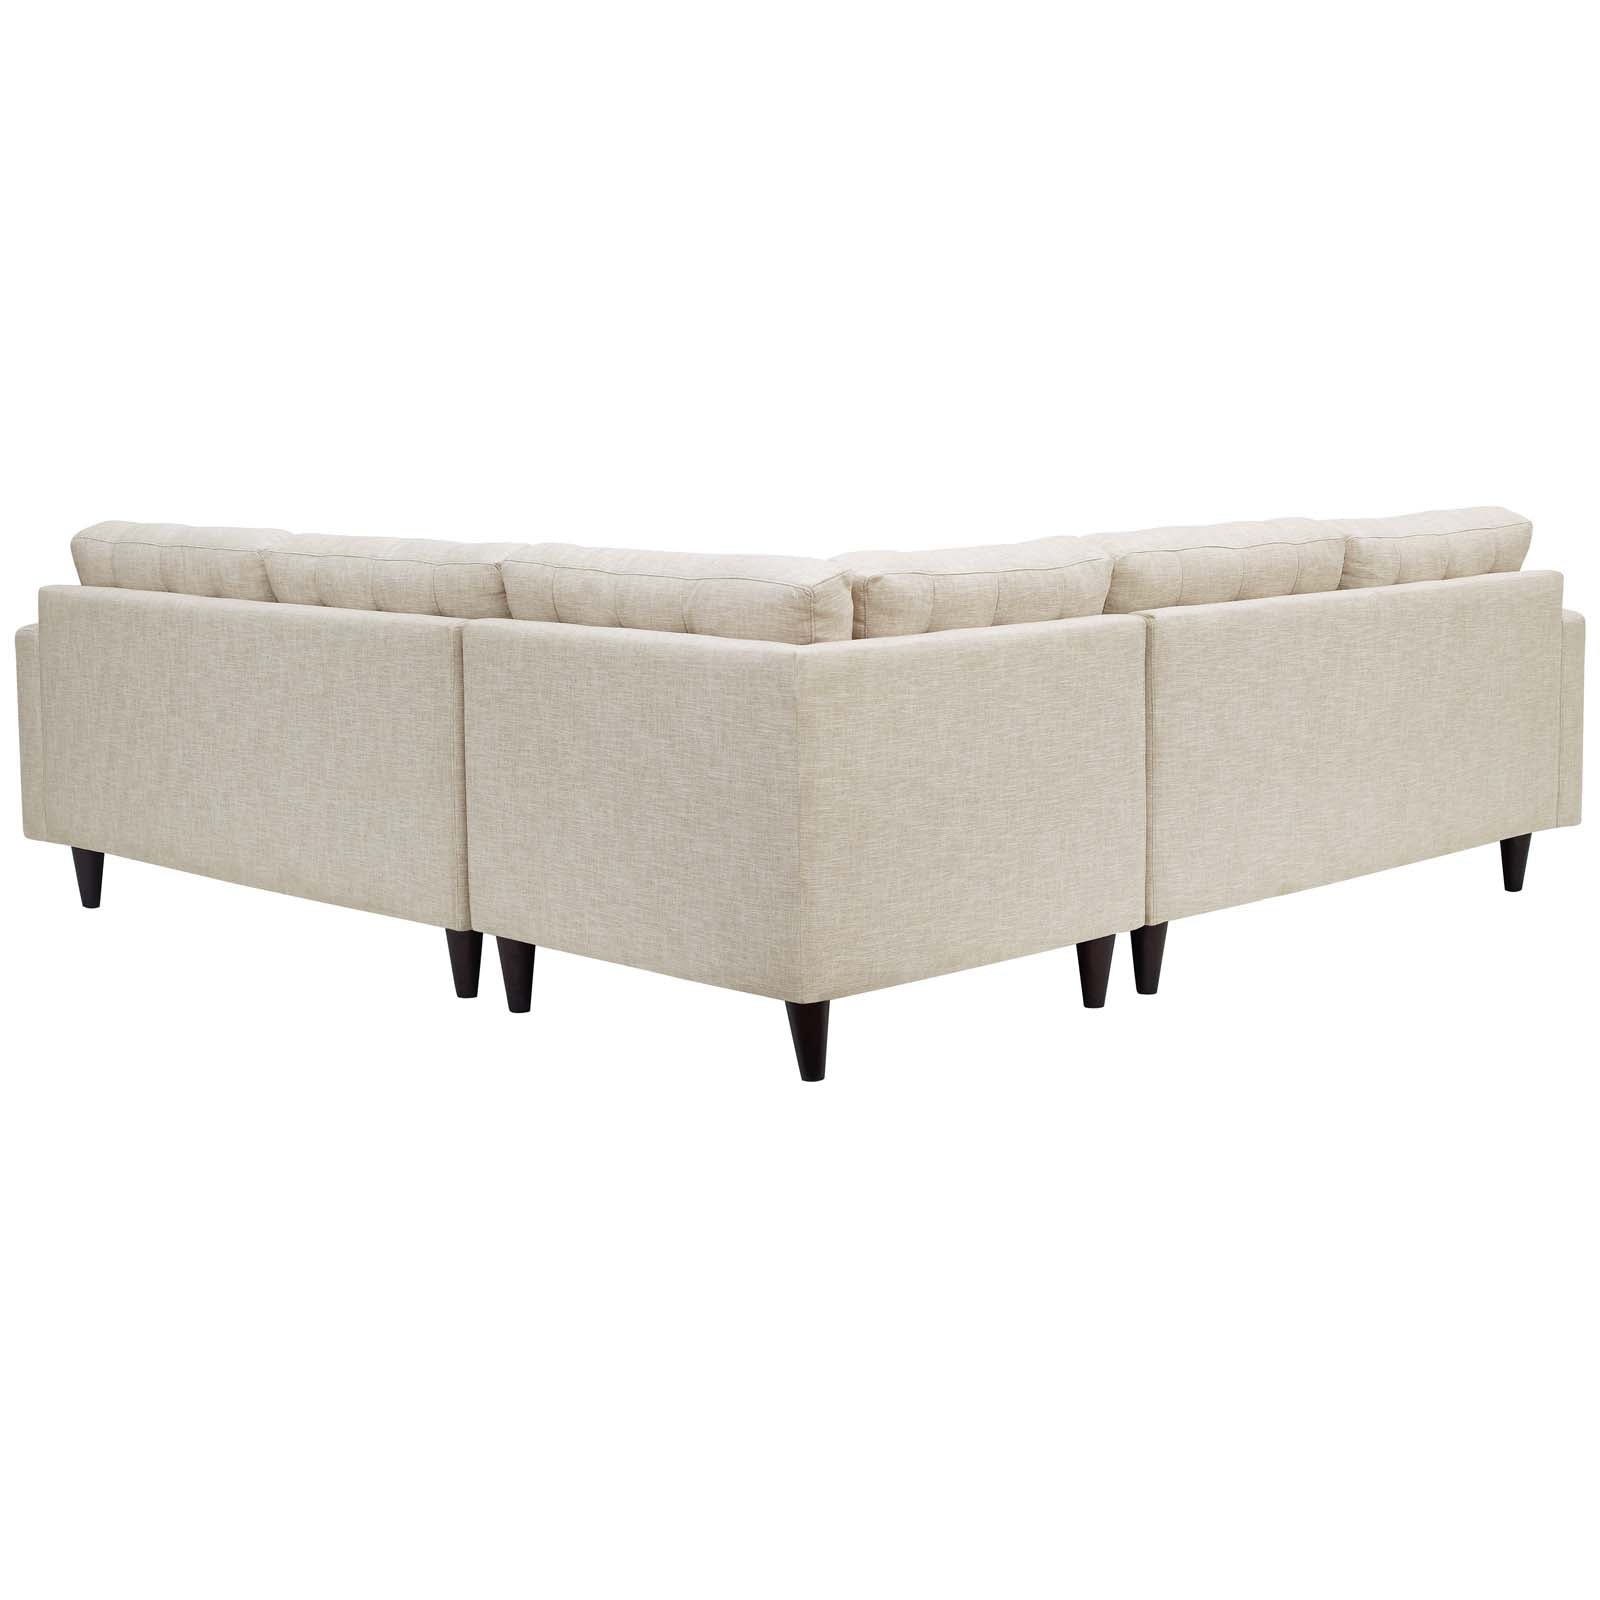 Modway Sectional Sofas - Empress 3 Piece Upholstered Fabric Sectional Sofa Set Beige